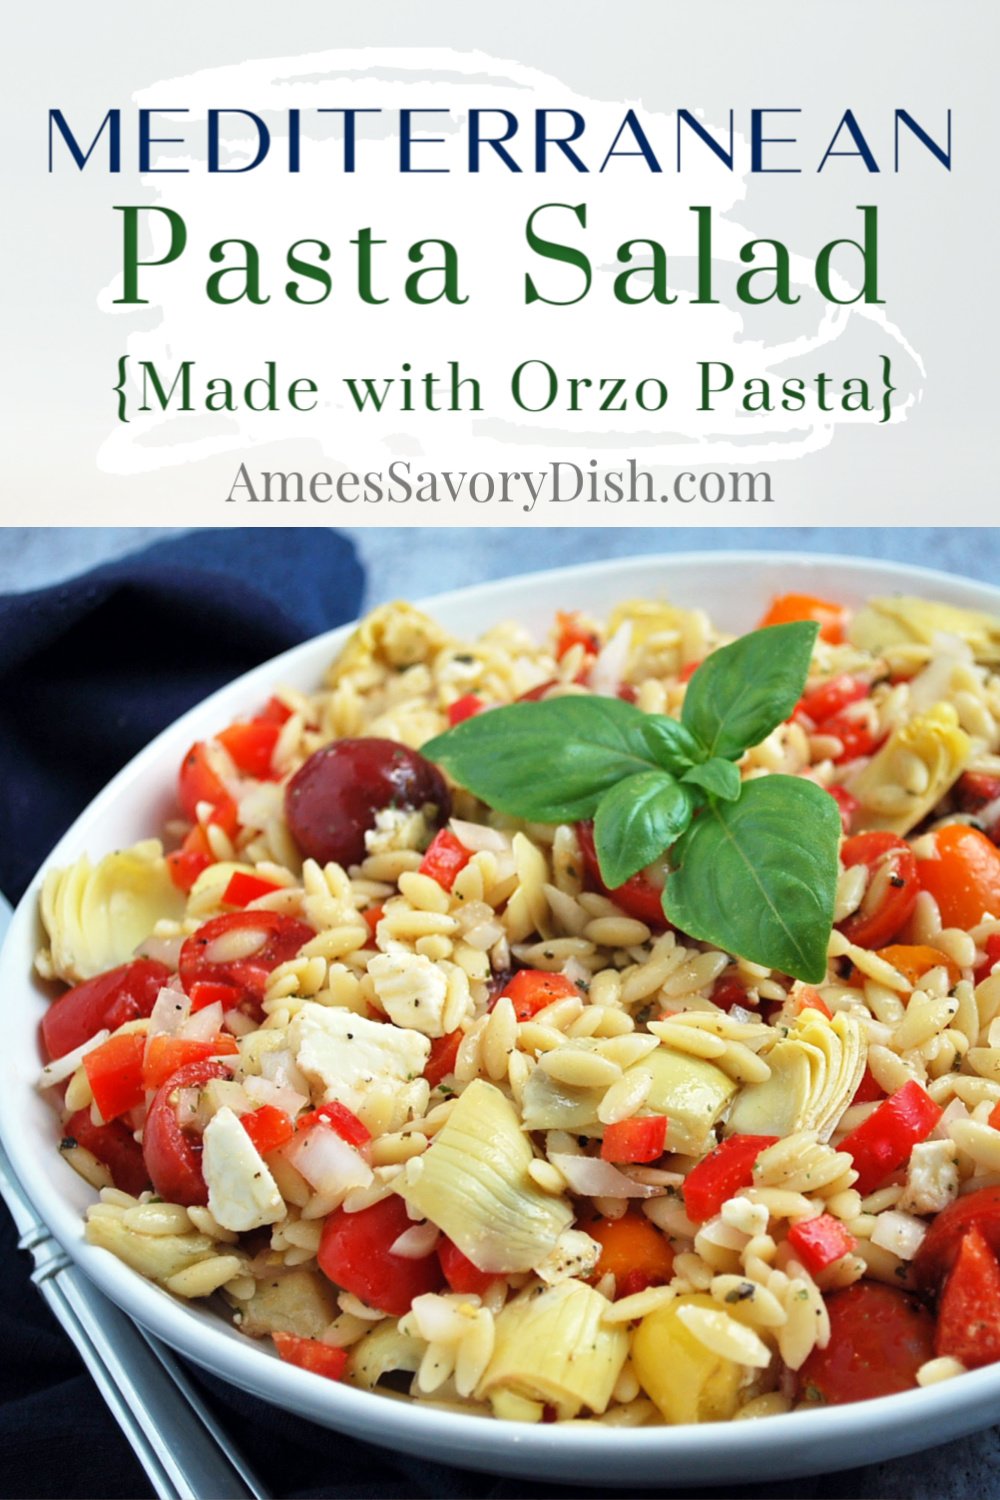 A flavorful orzo pasta salad recipe made with artichoke hearts, tomatoes, bell pepper, onion, and feta cheese tossed in a simple vinaigrette dressing.  #pastasalad #orzopasta #orzopastasalad #sidedishrecipes via @Ameessavorydish